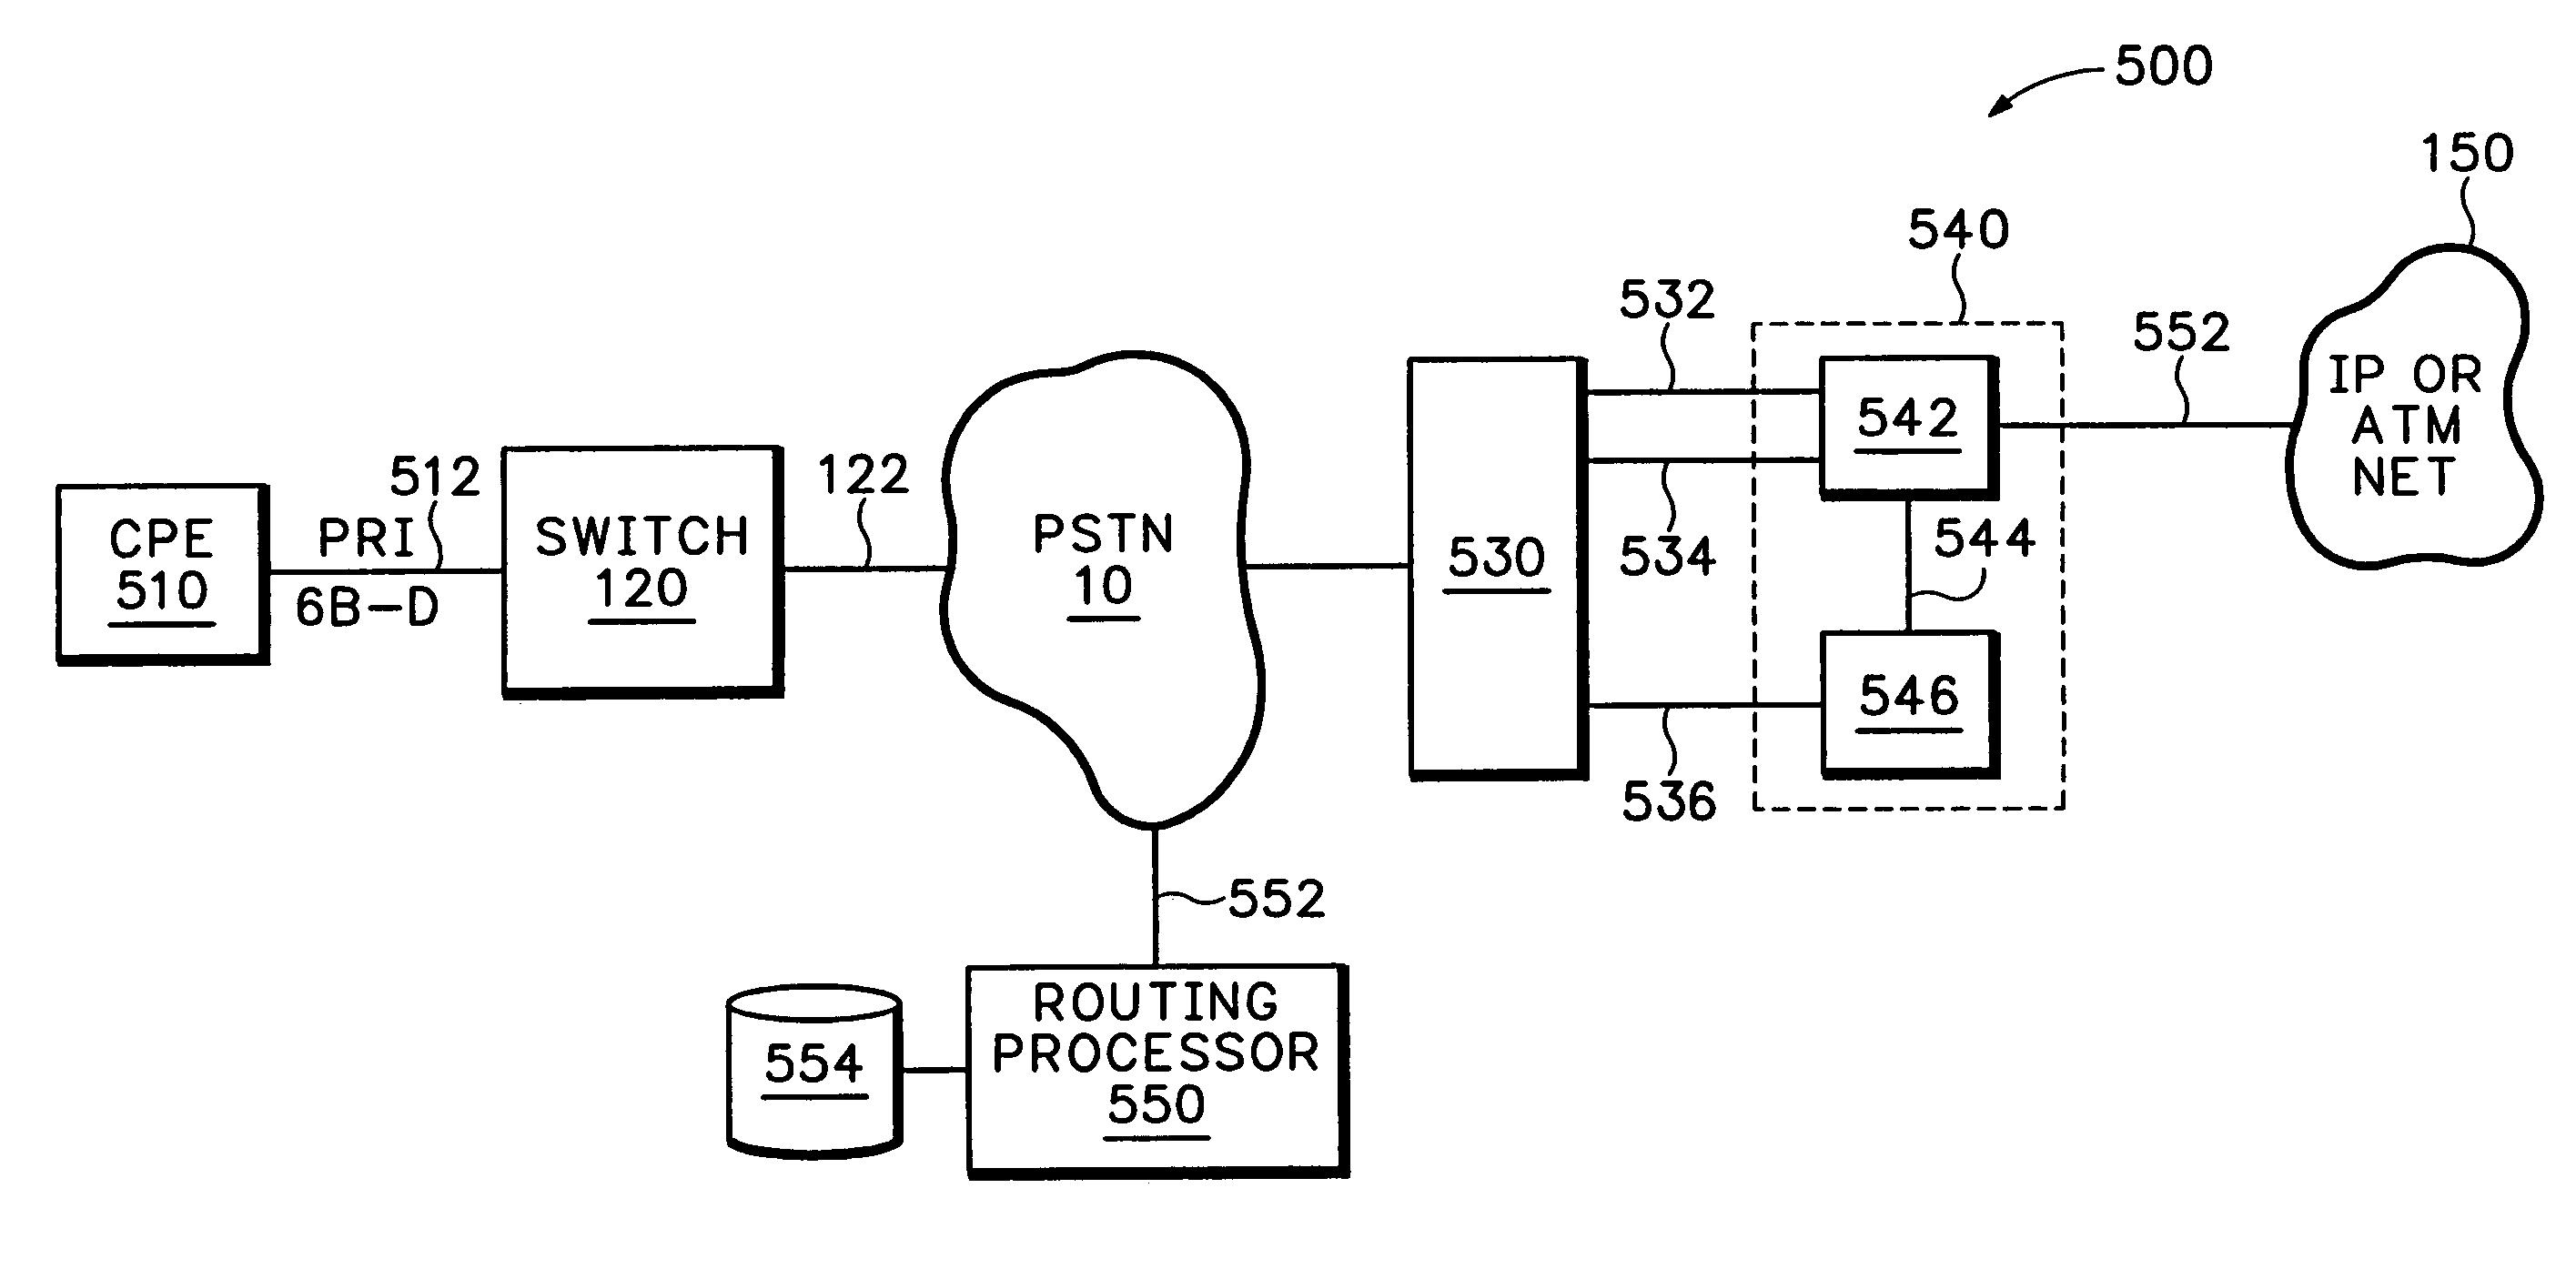 Call control system and method for automatic routing of circuit switched data connections based upon stored communication link information